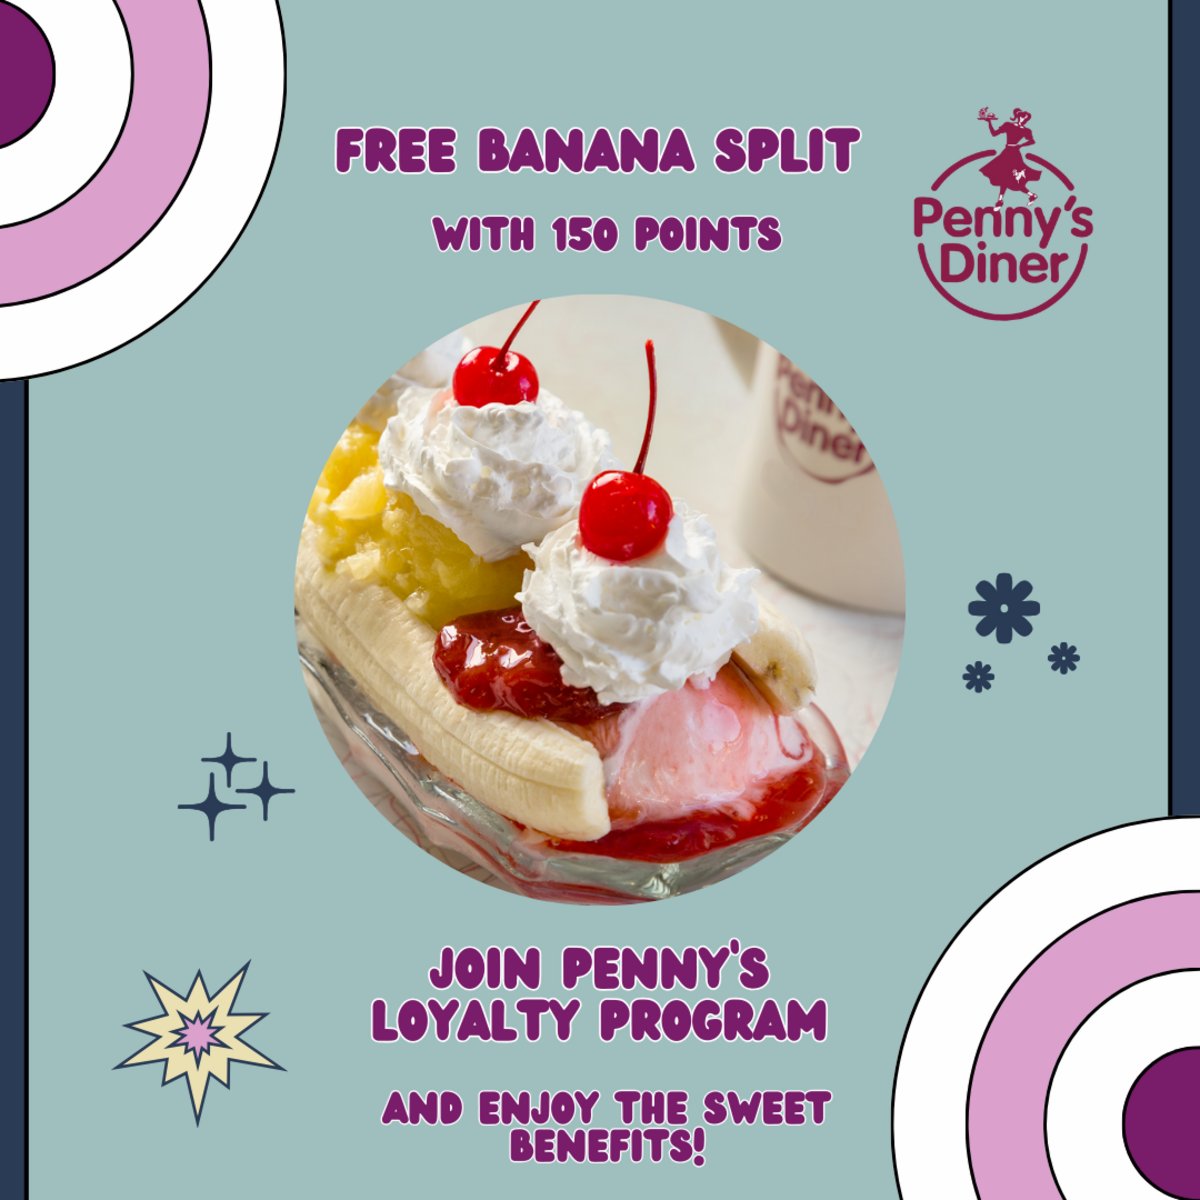 Isn't it about time you got your just #desserts? Well, now you can when you join our #LoyaltyProgram! Earn two points for every dollar you spend at Penny's Diner Rawlins and redeem your points for sweet rewards, like a free #bananasplit!